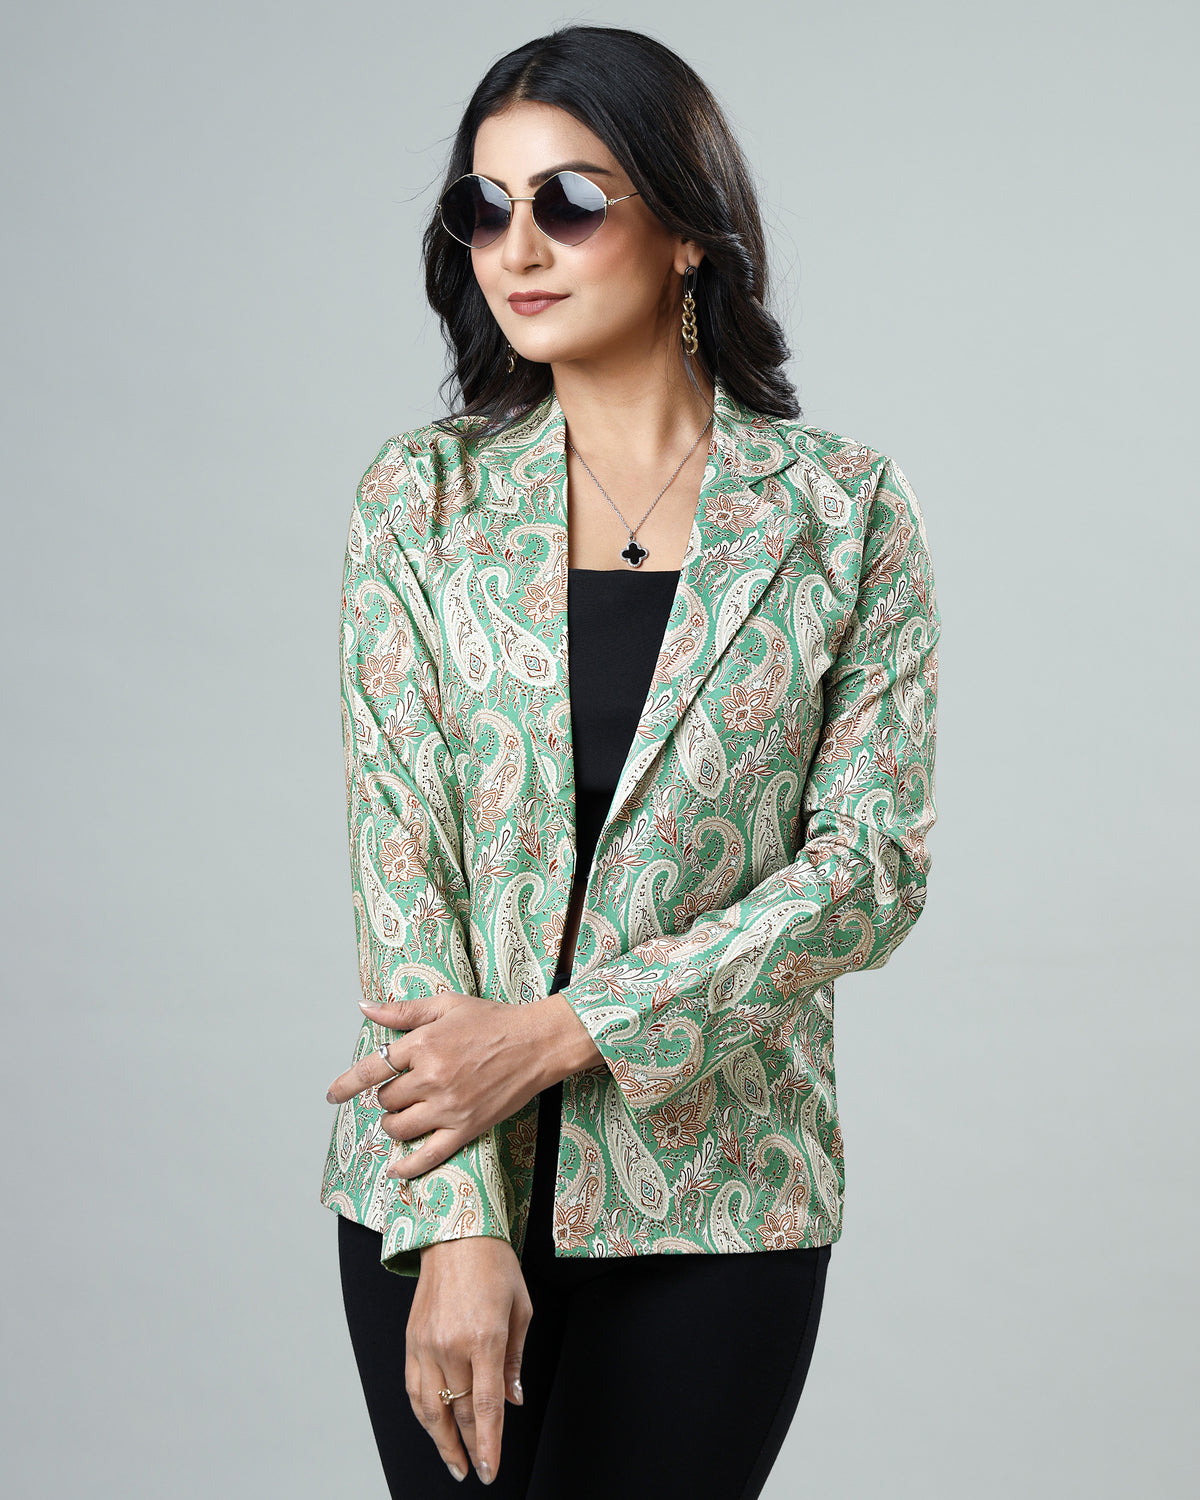 Starry Paisley: A Women's Jacket for Dreamers